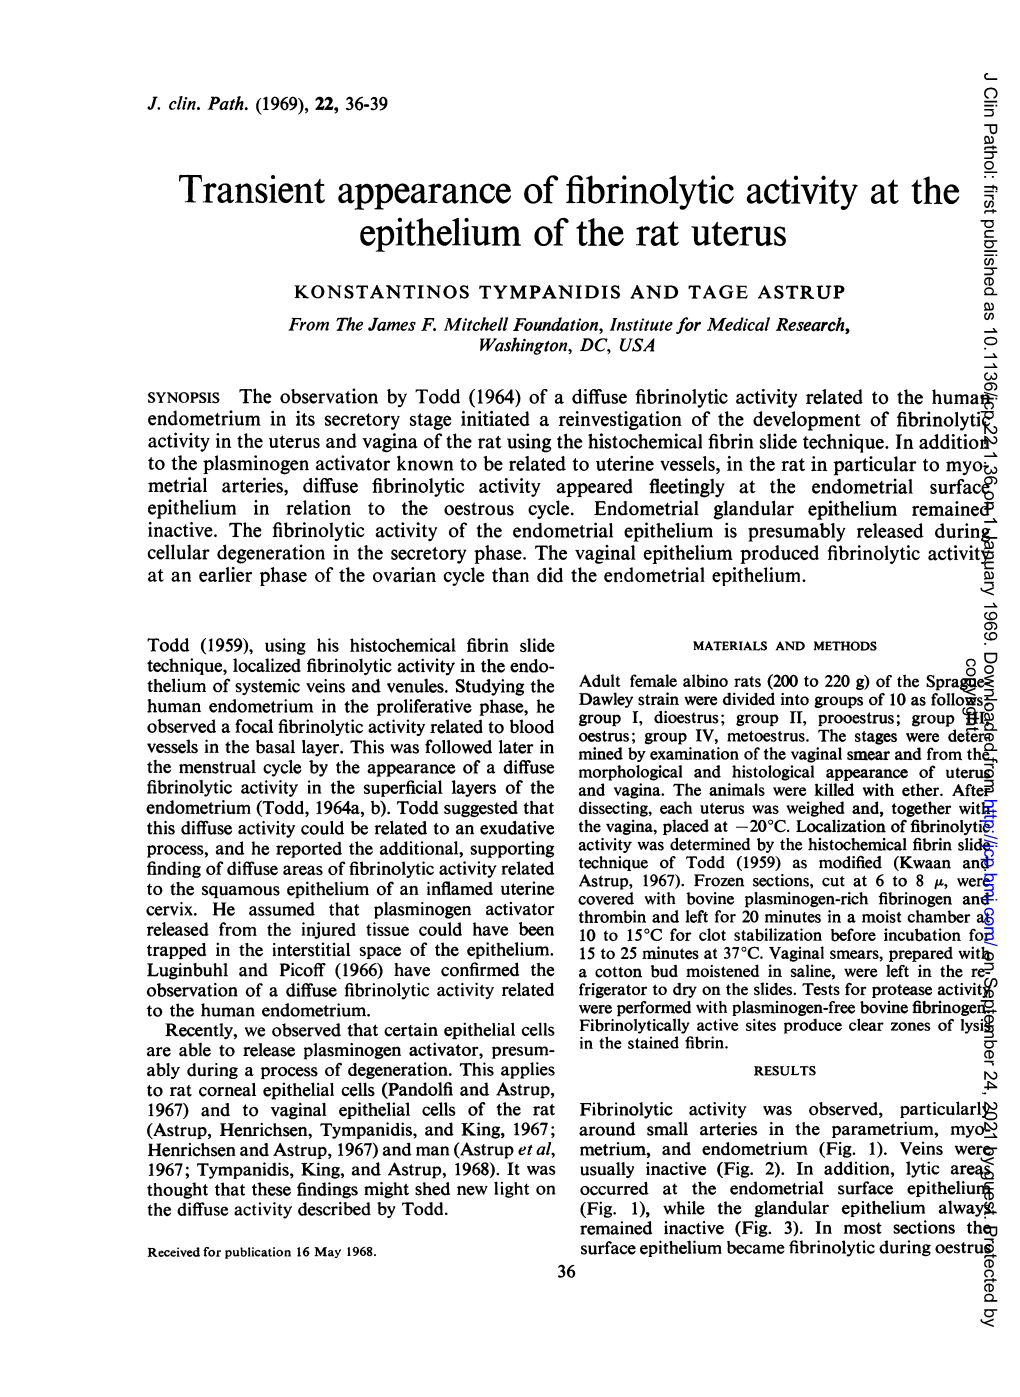 Transient Appearance of Fibrinolytic Activity at the Epithelium of the Rat Uterus